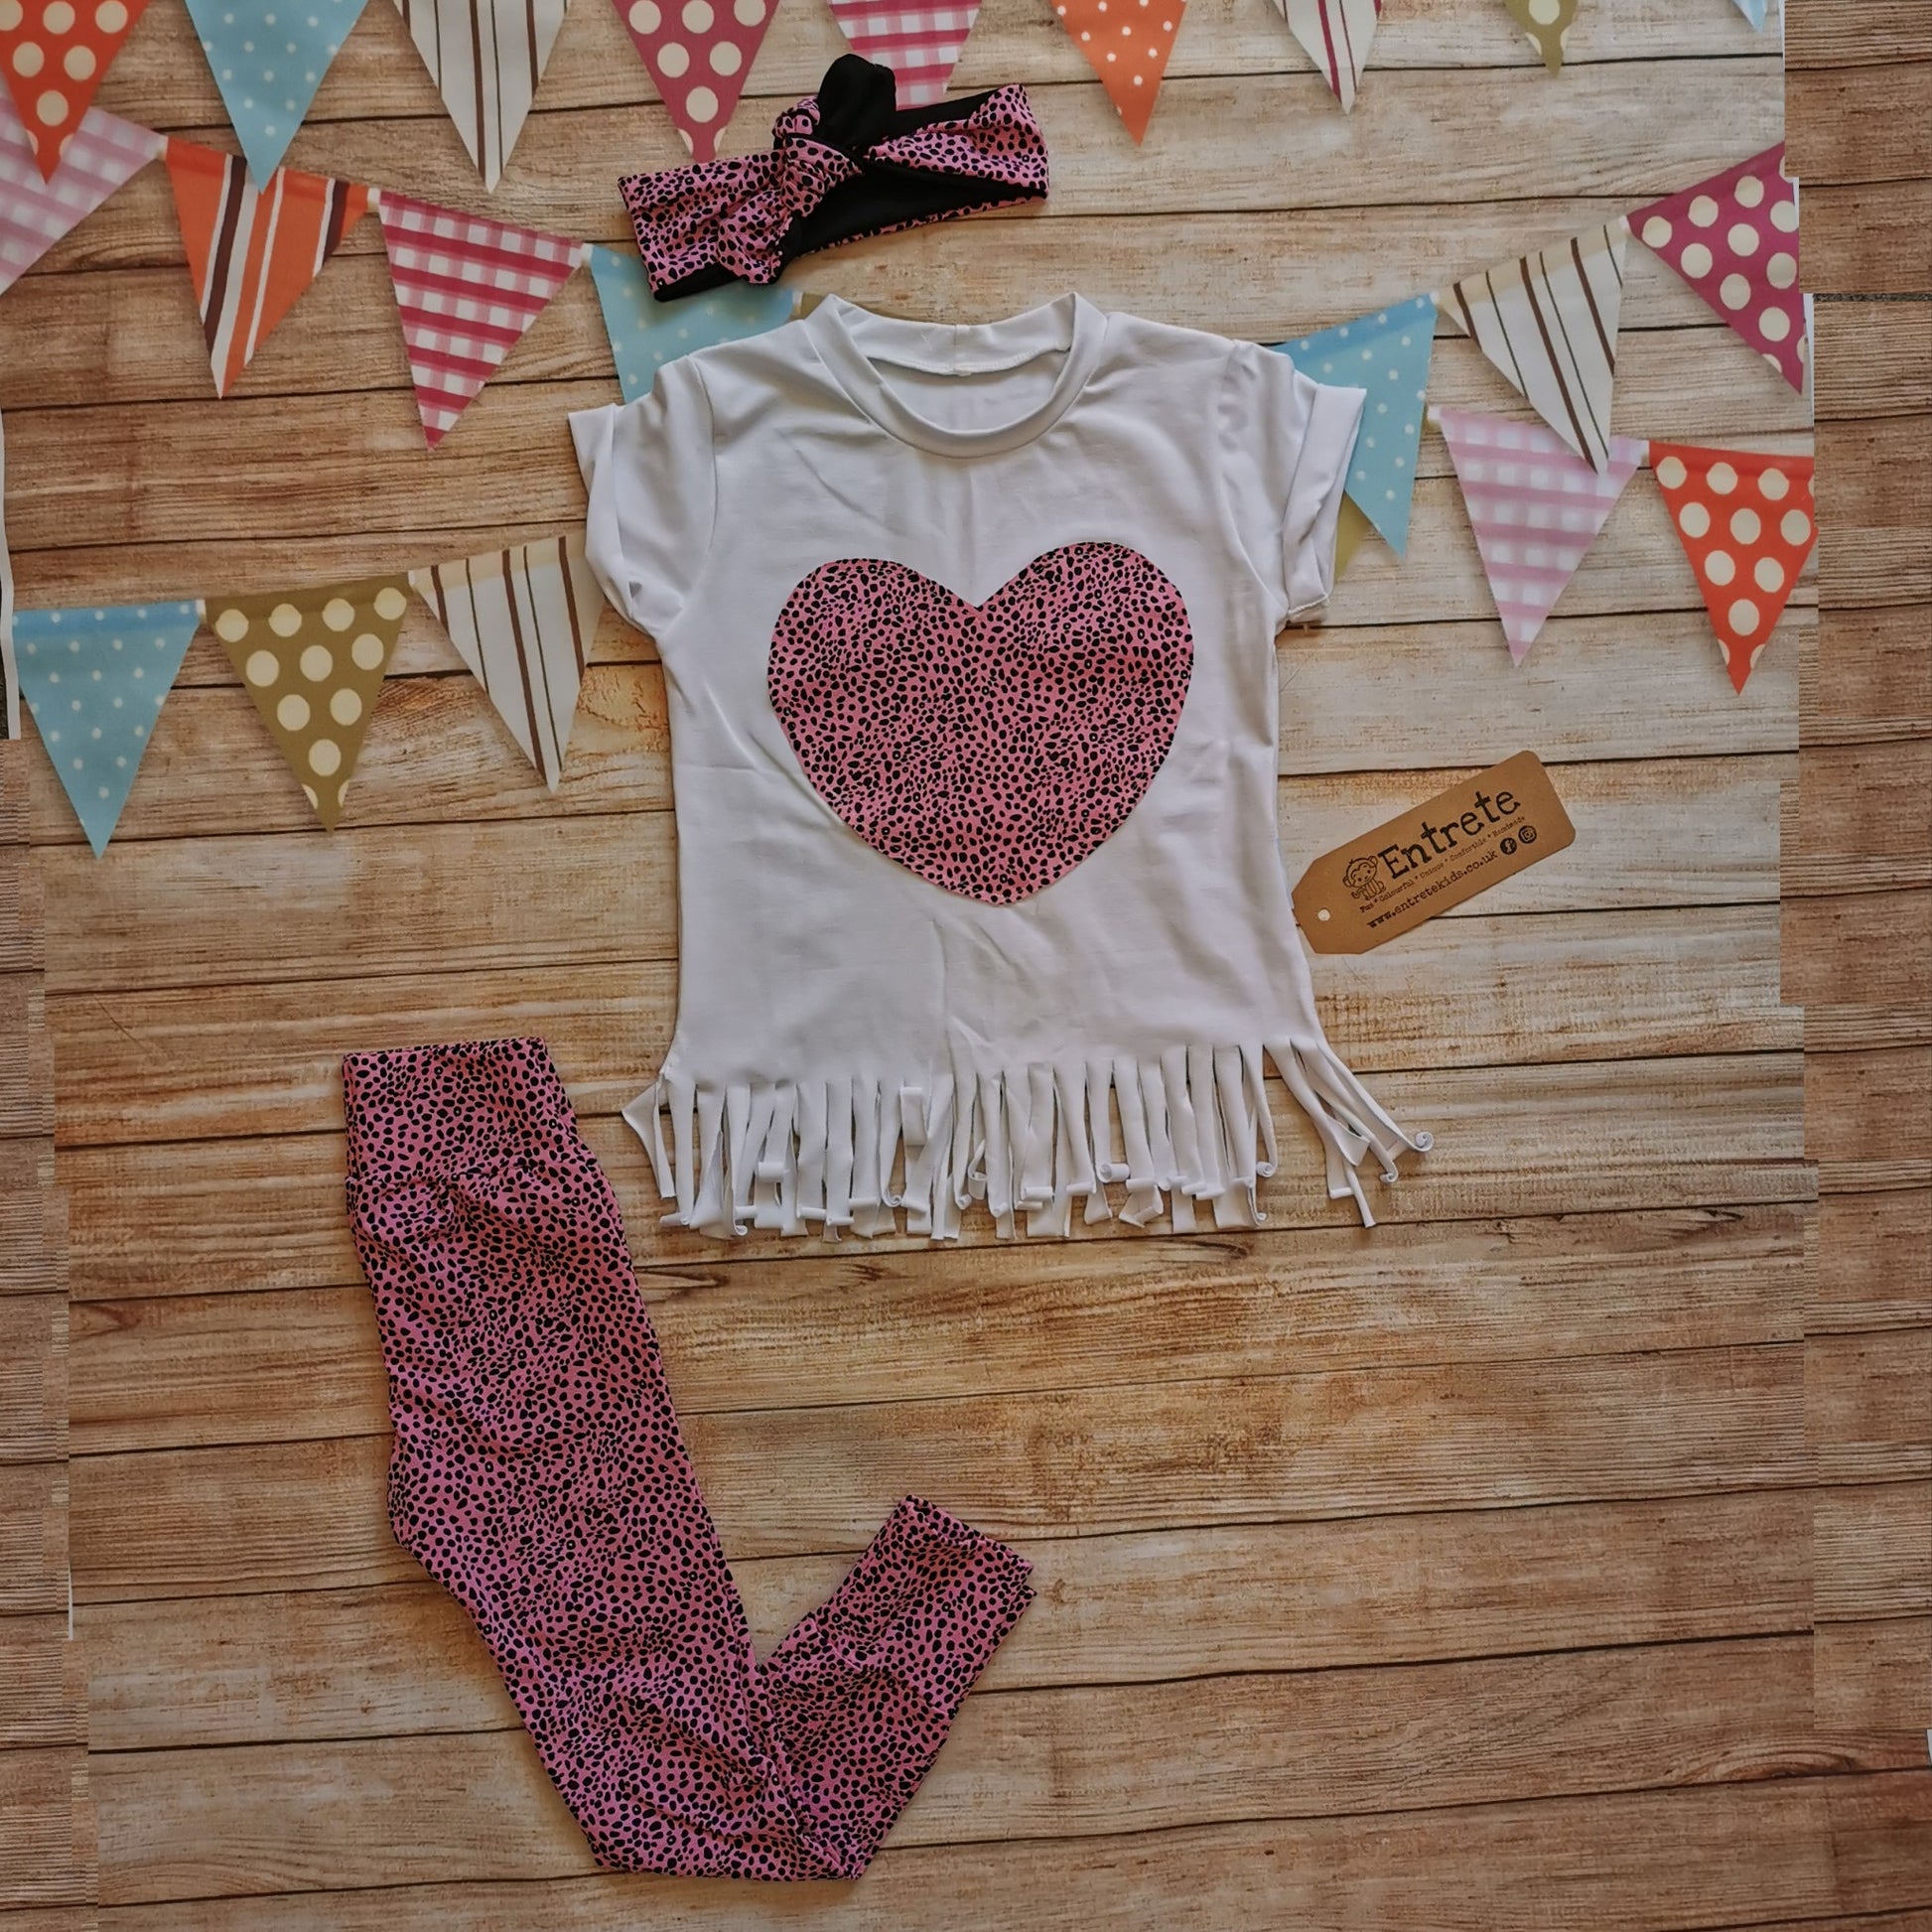 Kids pink cheetah leggings, shown as an outfit with a gorgeous pink cheetah heart tassel tee and matching headband. (sold separately).